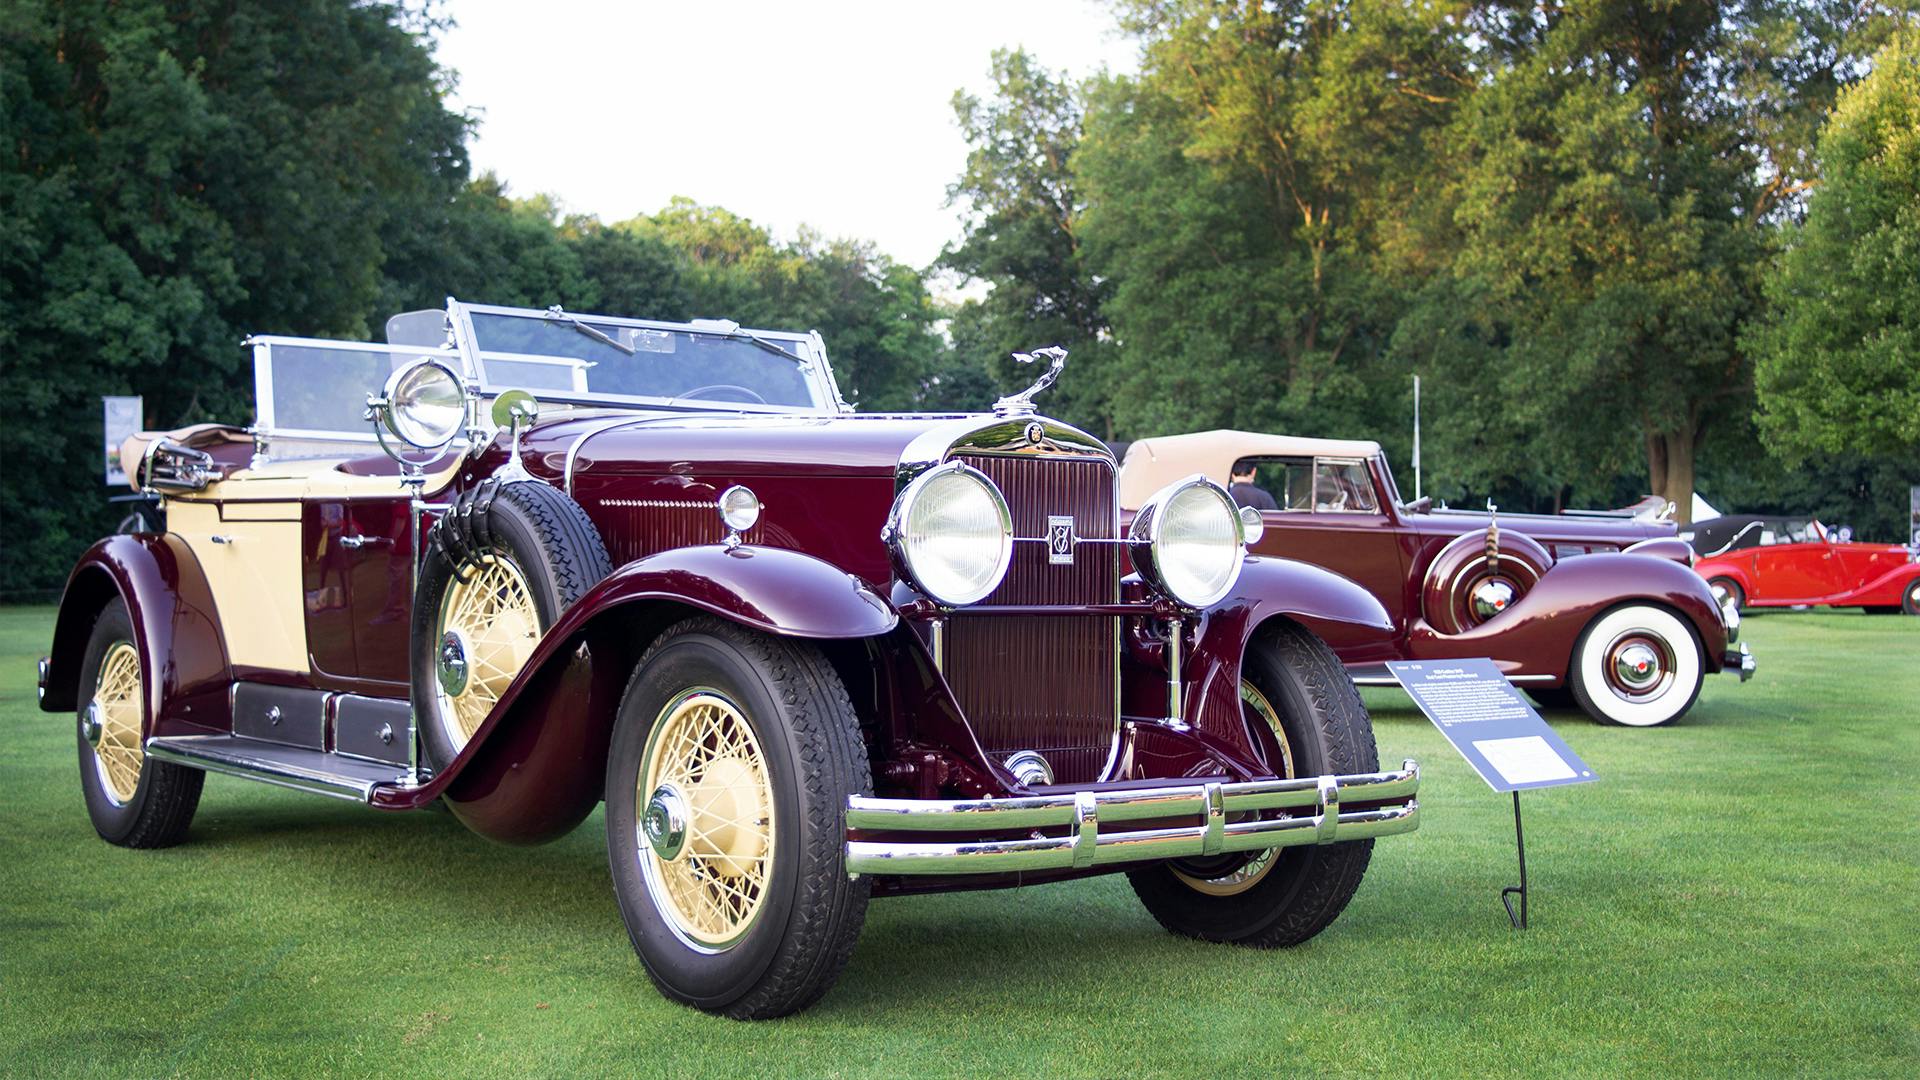 Concours, Car Shows and Cruise Nights | Greenwich Concours Seminar